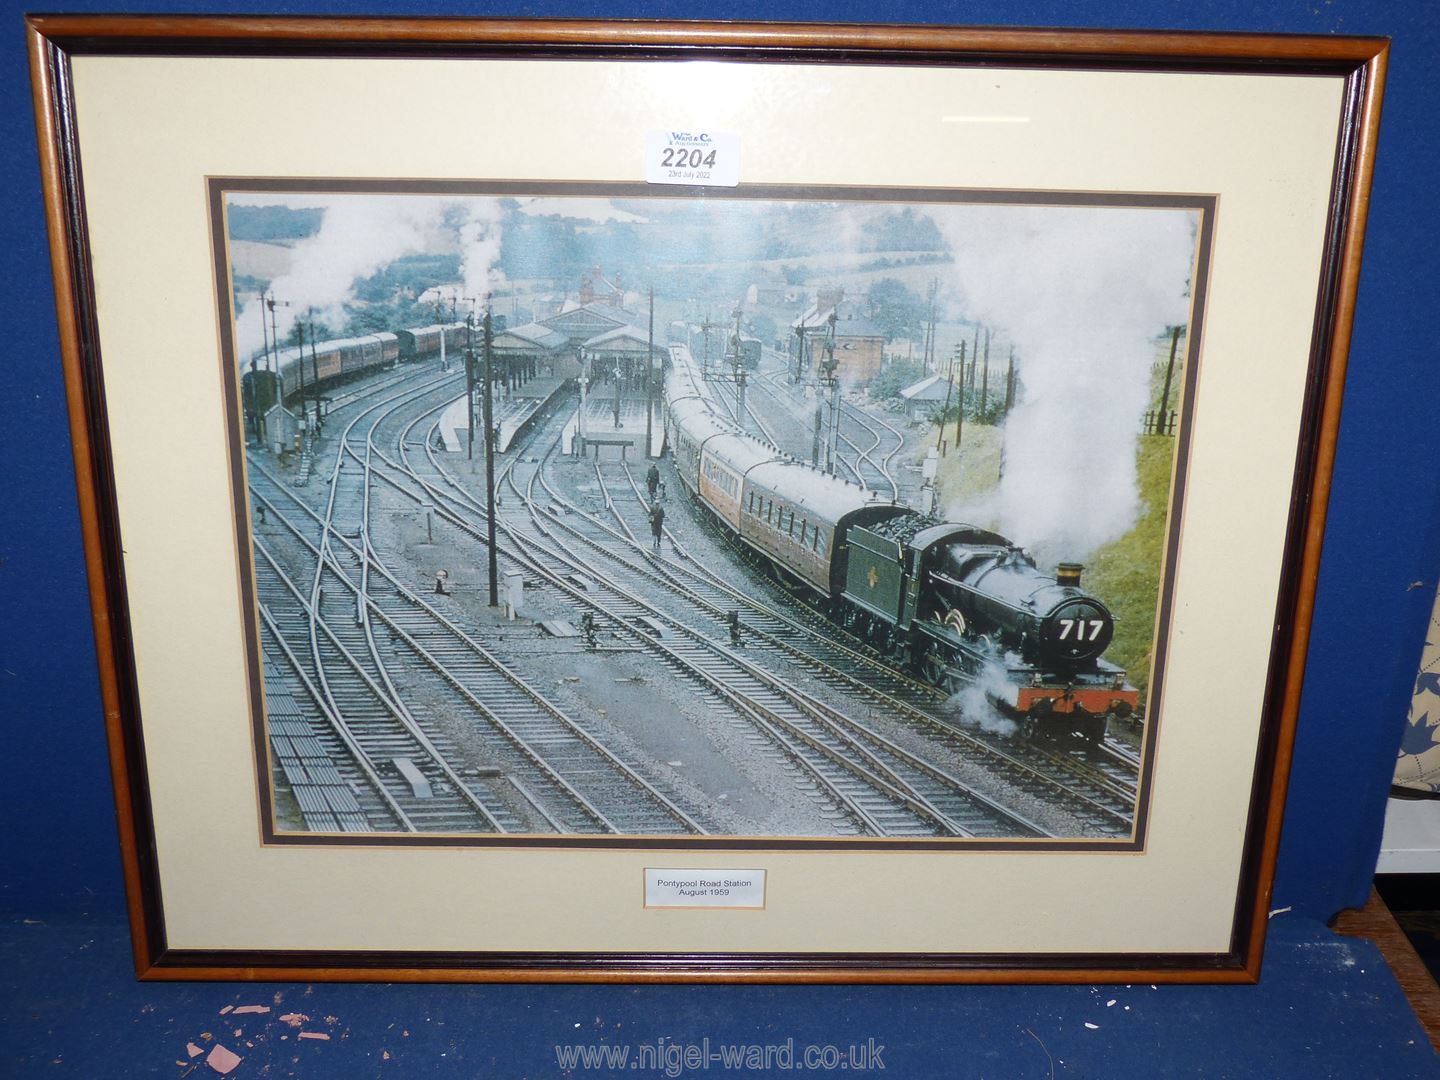 A Print taken from a photograph of Pontypool Road Station, August 1959.